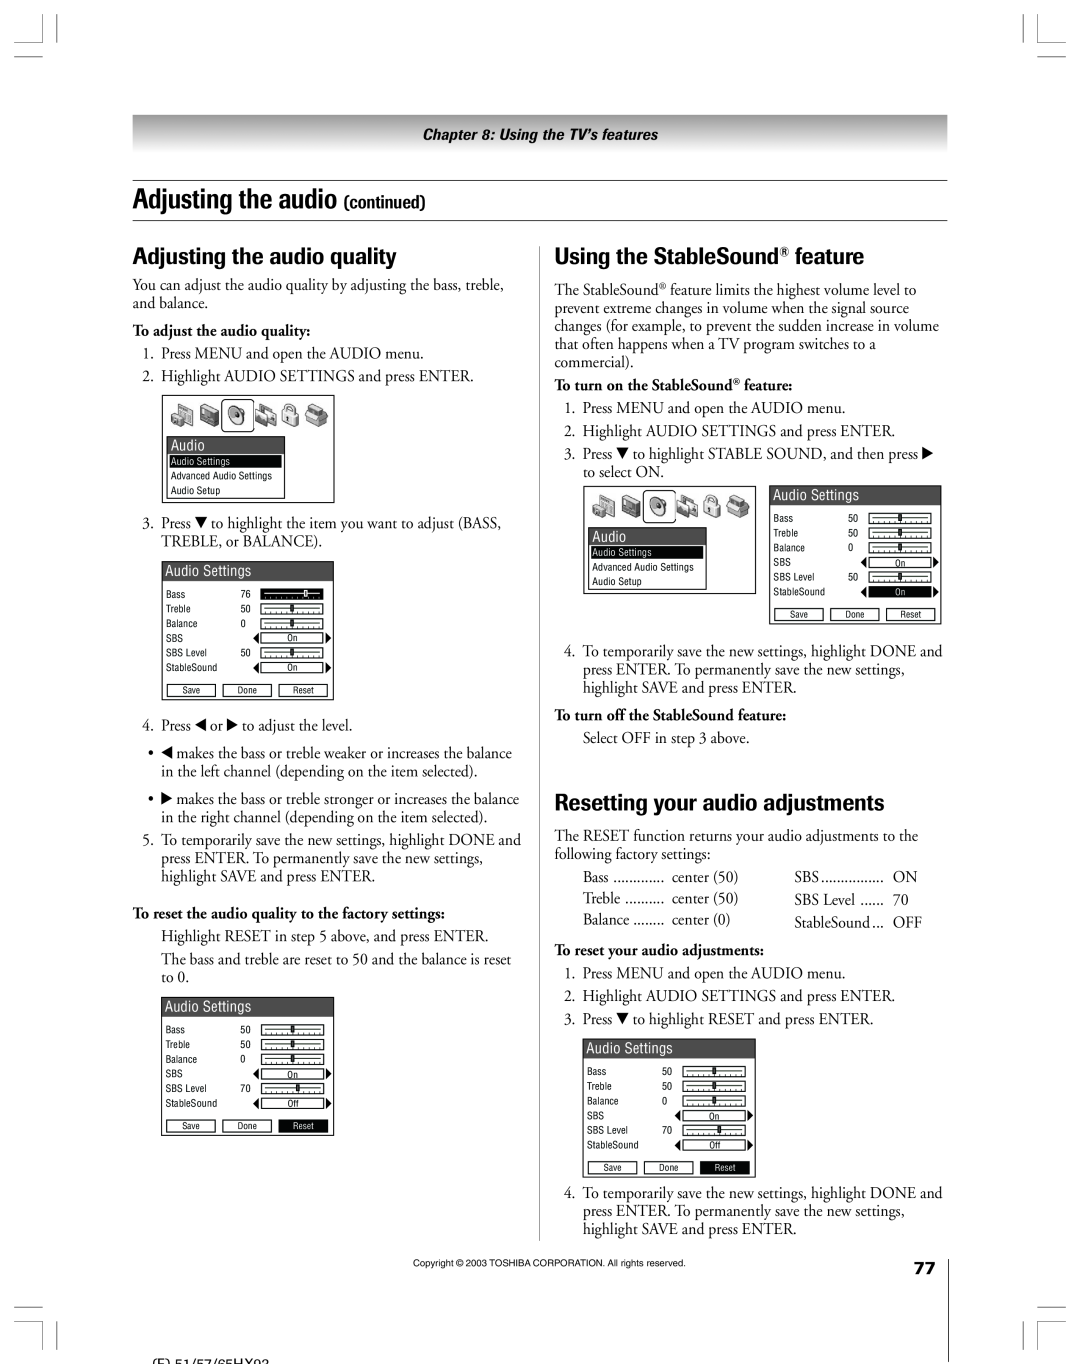 Toshiba 51HX93 owner manual Adjusting the audio continued, Adjusting the audio quality, Using the StableSound feature 